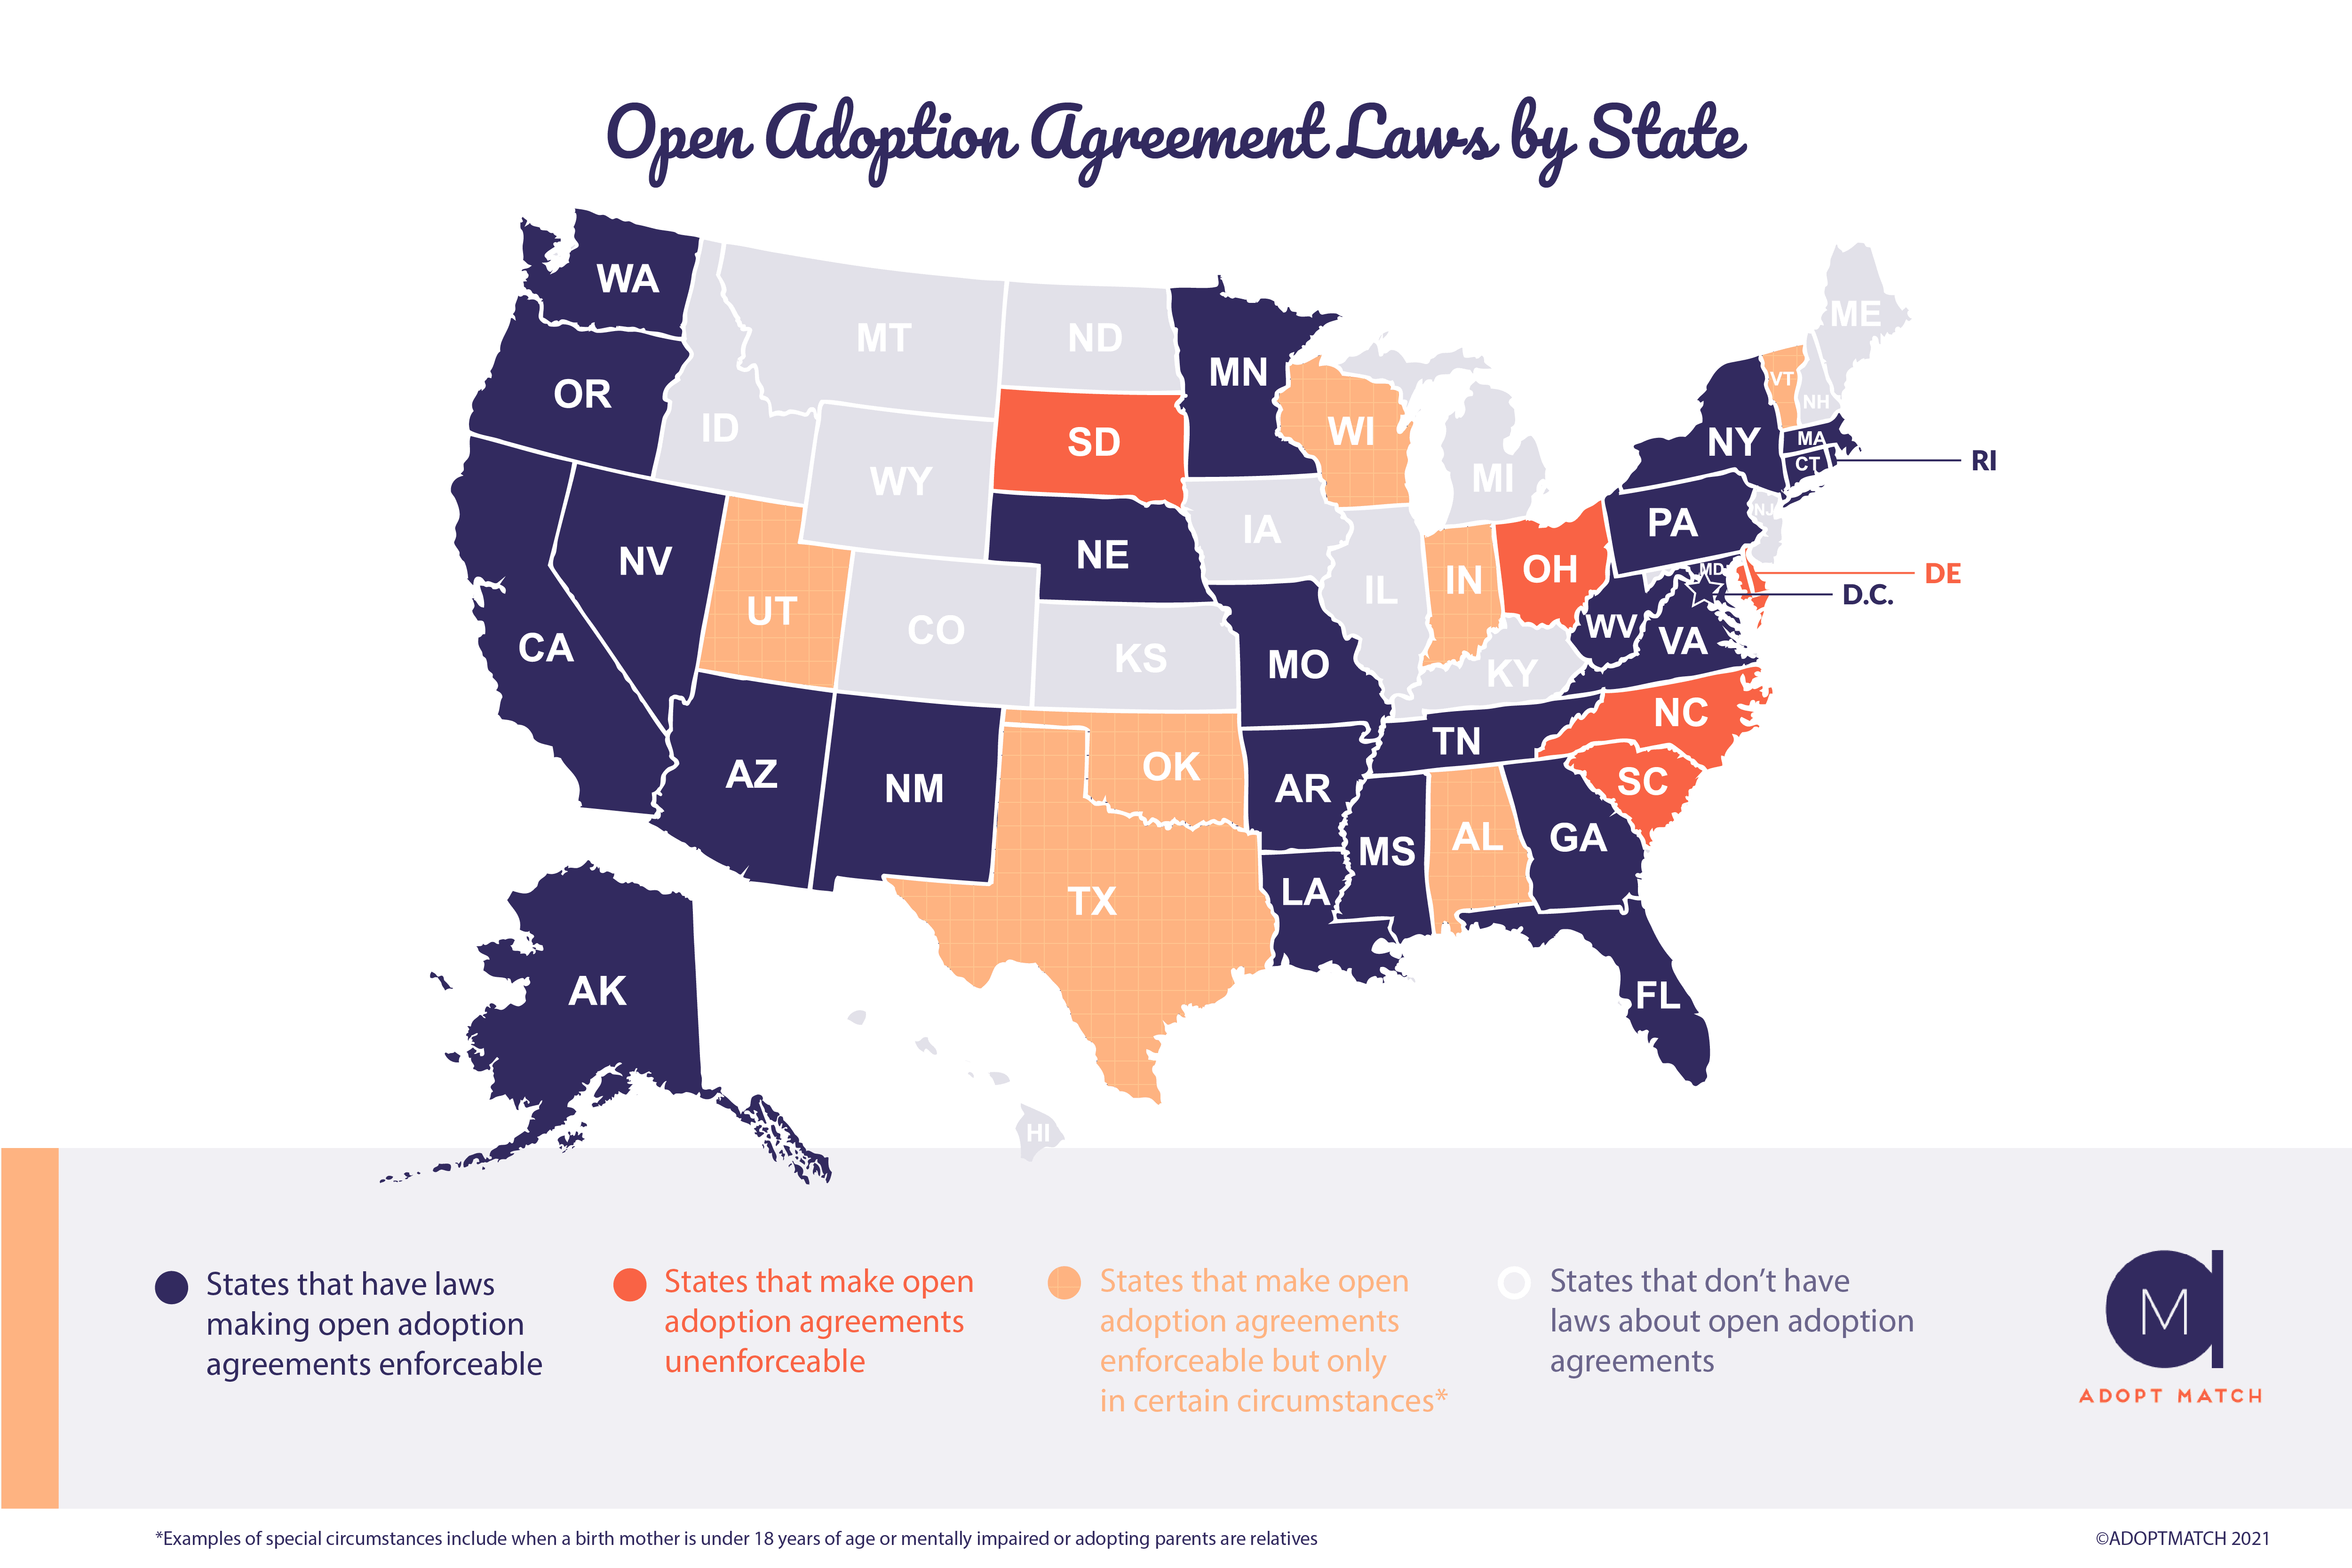 Open Adoption Rules Post Adoption Agreement Laws by State Map